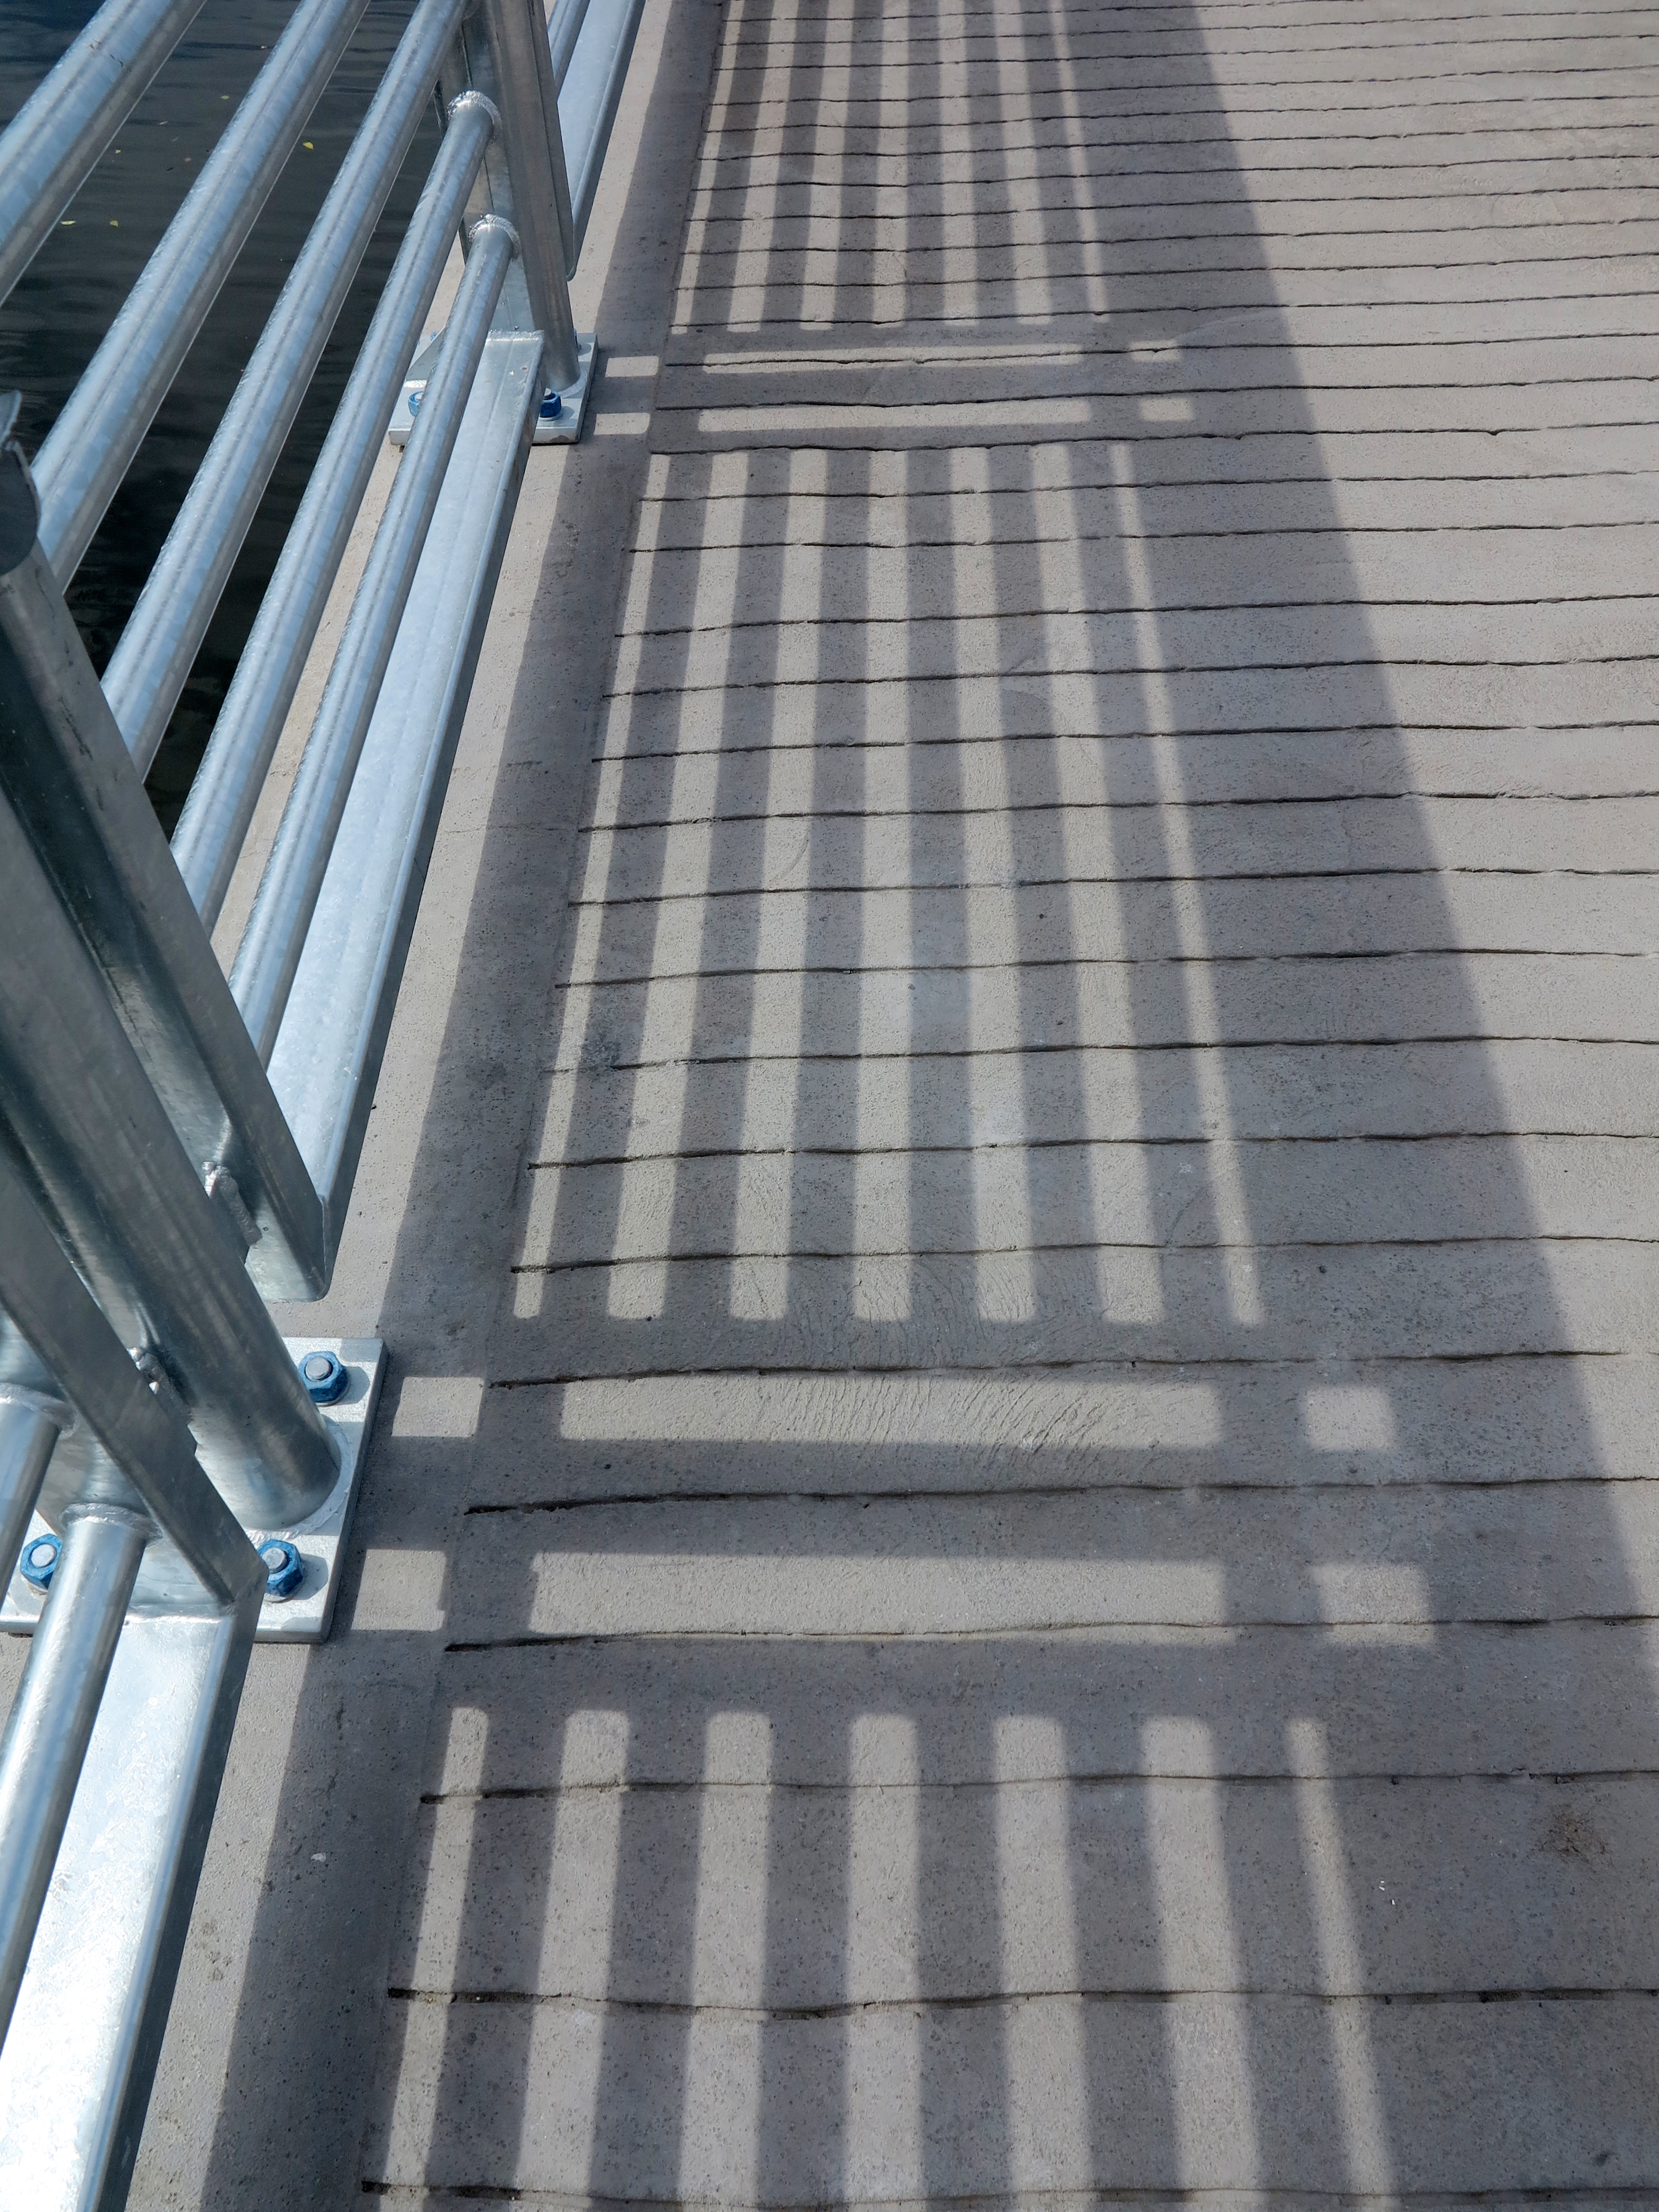 Boardwalk textures: Scored concrete, stainless stell railings